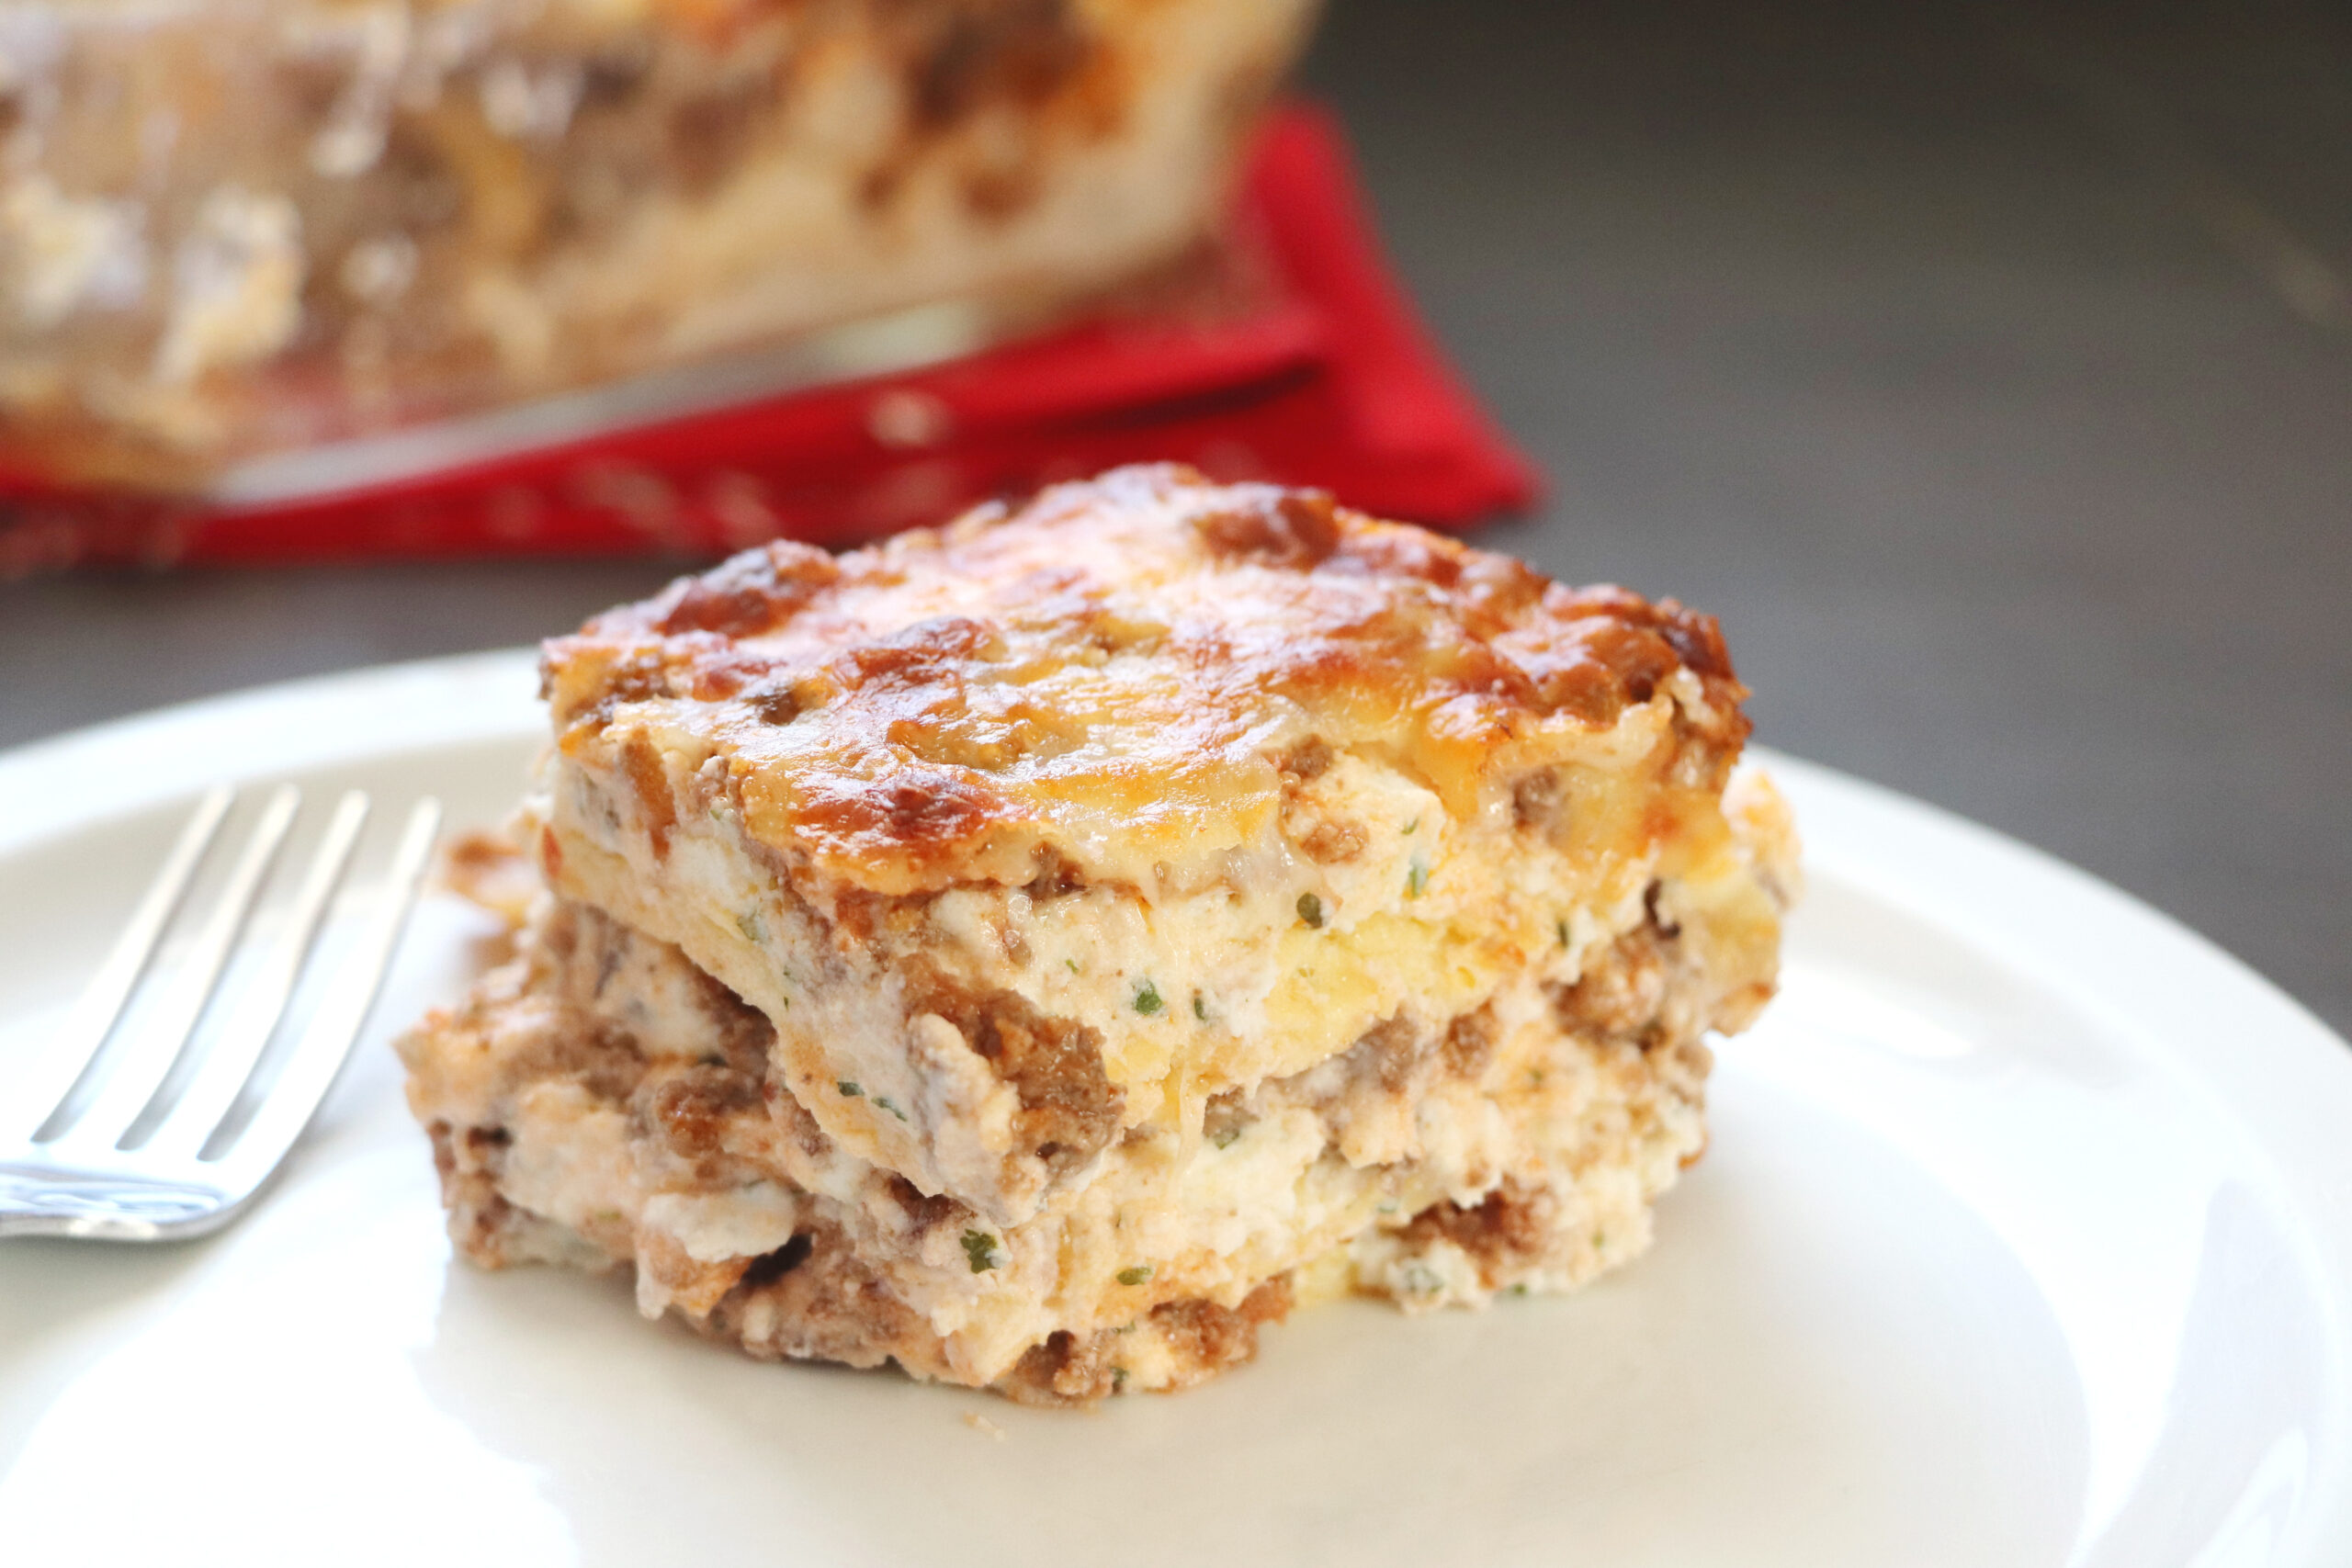 Keto Lasagna (cheese noodles, relaxed carnivore) ⋆ Health, Home, ...